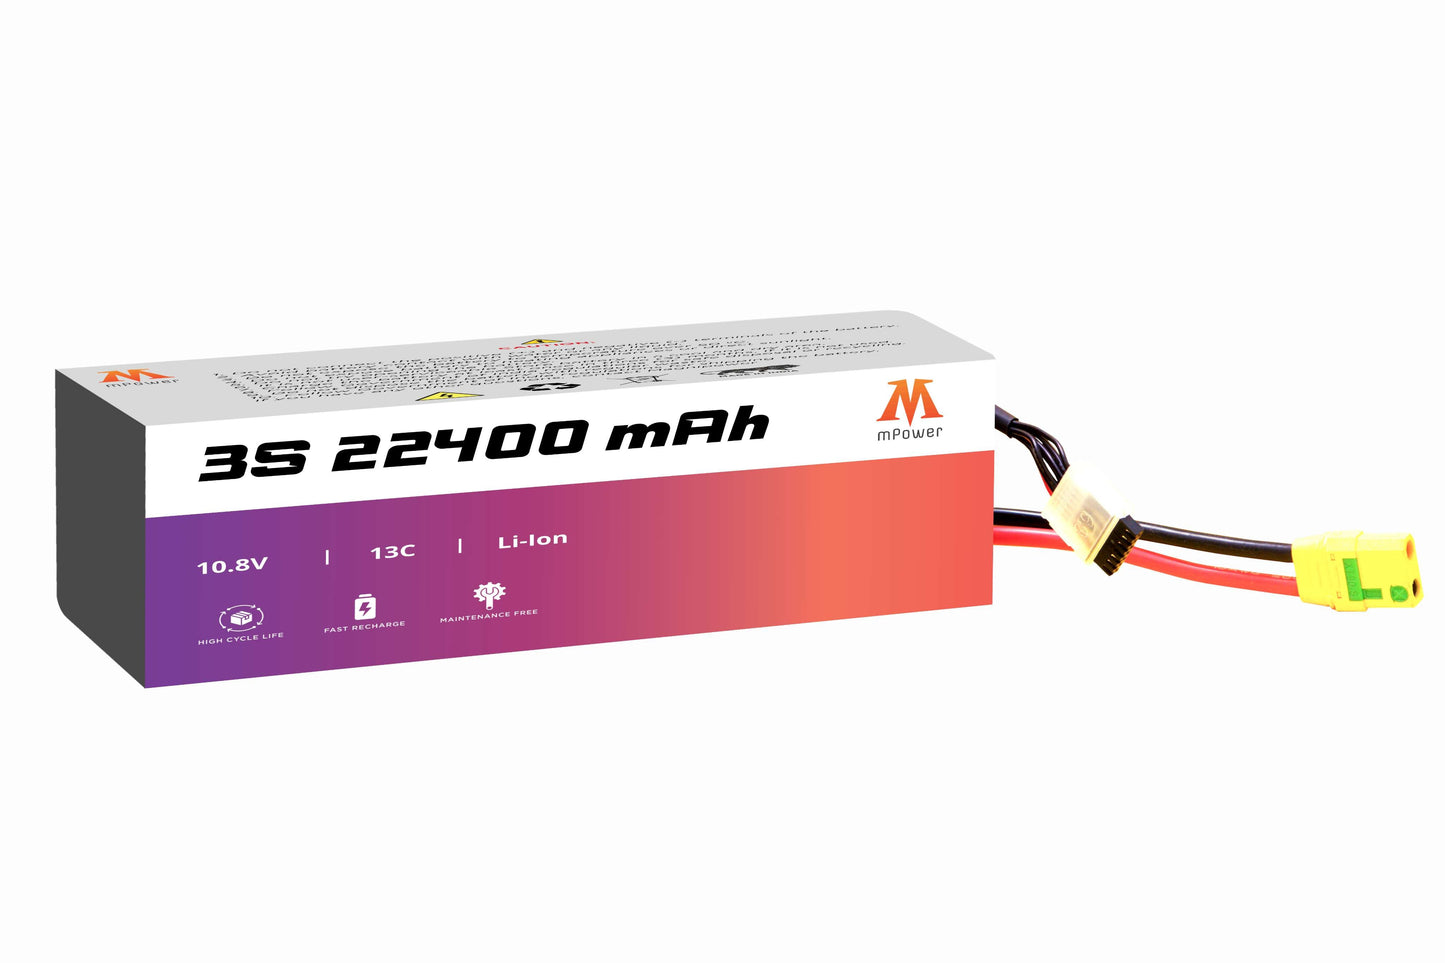 mPower 3S 22400mAh Lithium-Ion Battery for Survey Drones